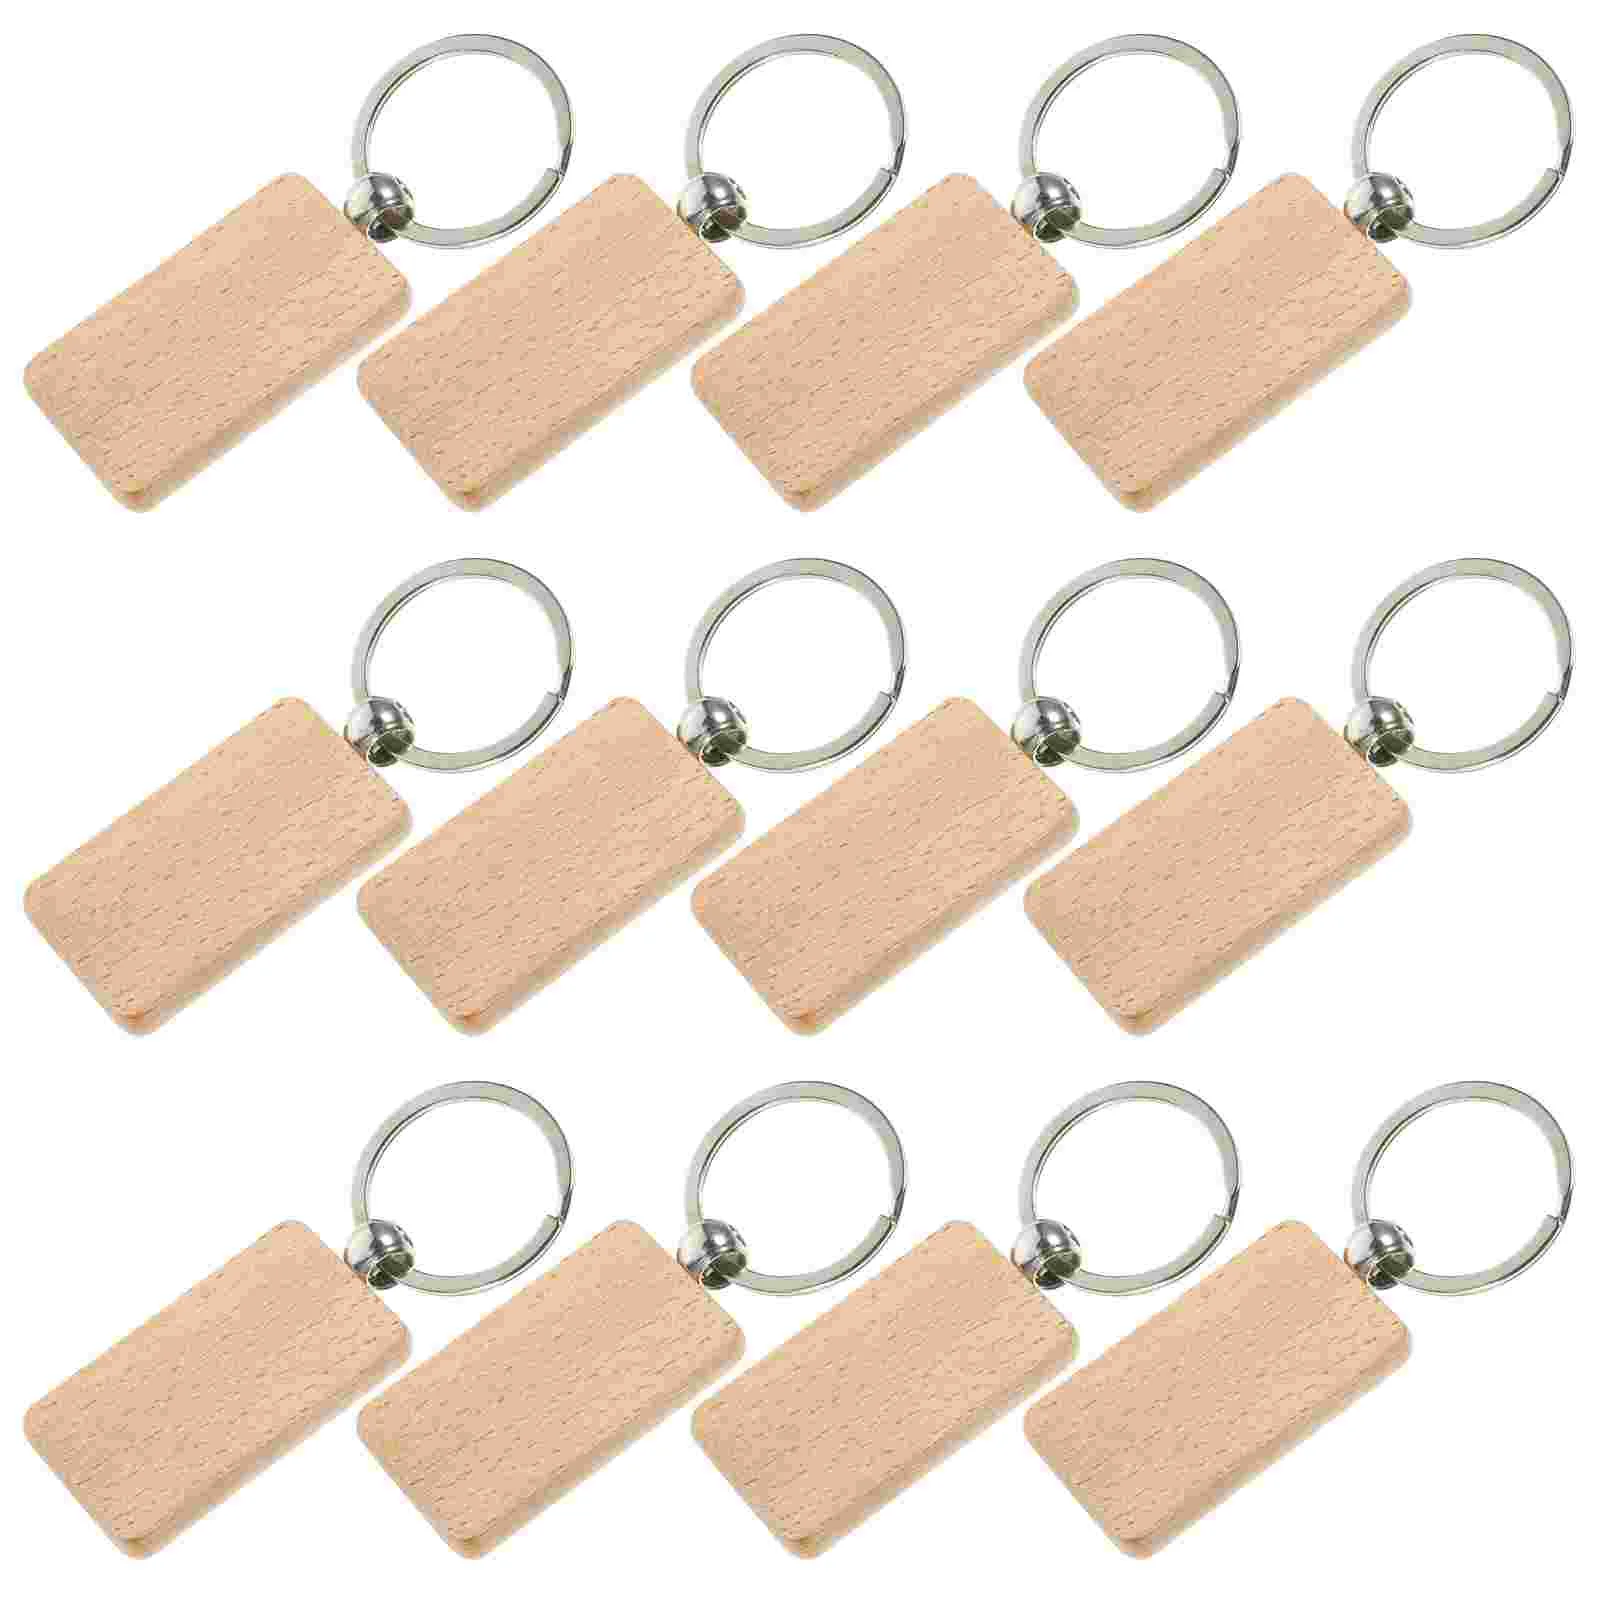 

Engravable Wooden Keychains DIY Lettering Key Chain Pendants Blank Wood Keychains DIY Crafts for DIY Gift Craft Making